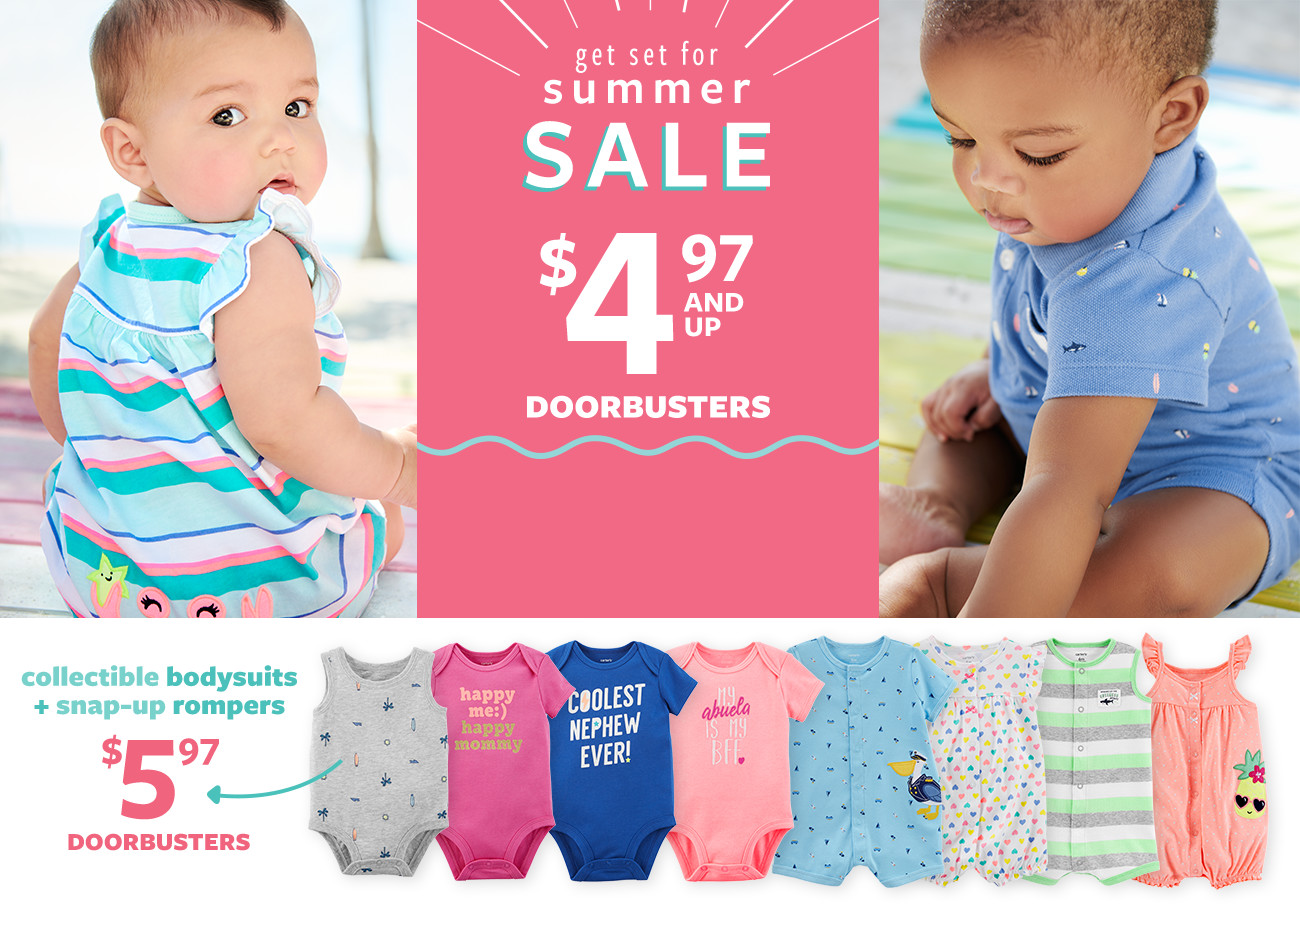 get set for summer SALE | $4.97 AND UP DOORBUSTERS | collectible bodysuits + snap-up rompers | $5.97 DOORBUSTERS